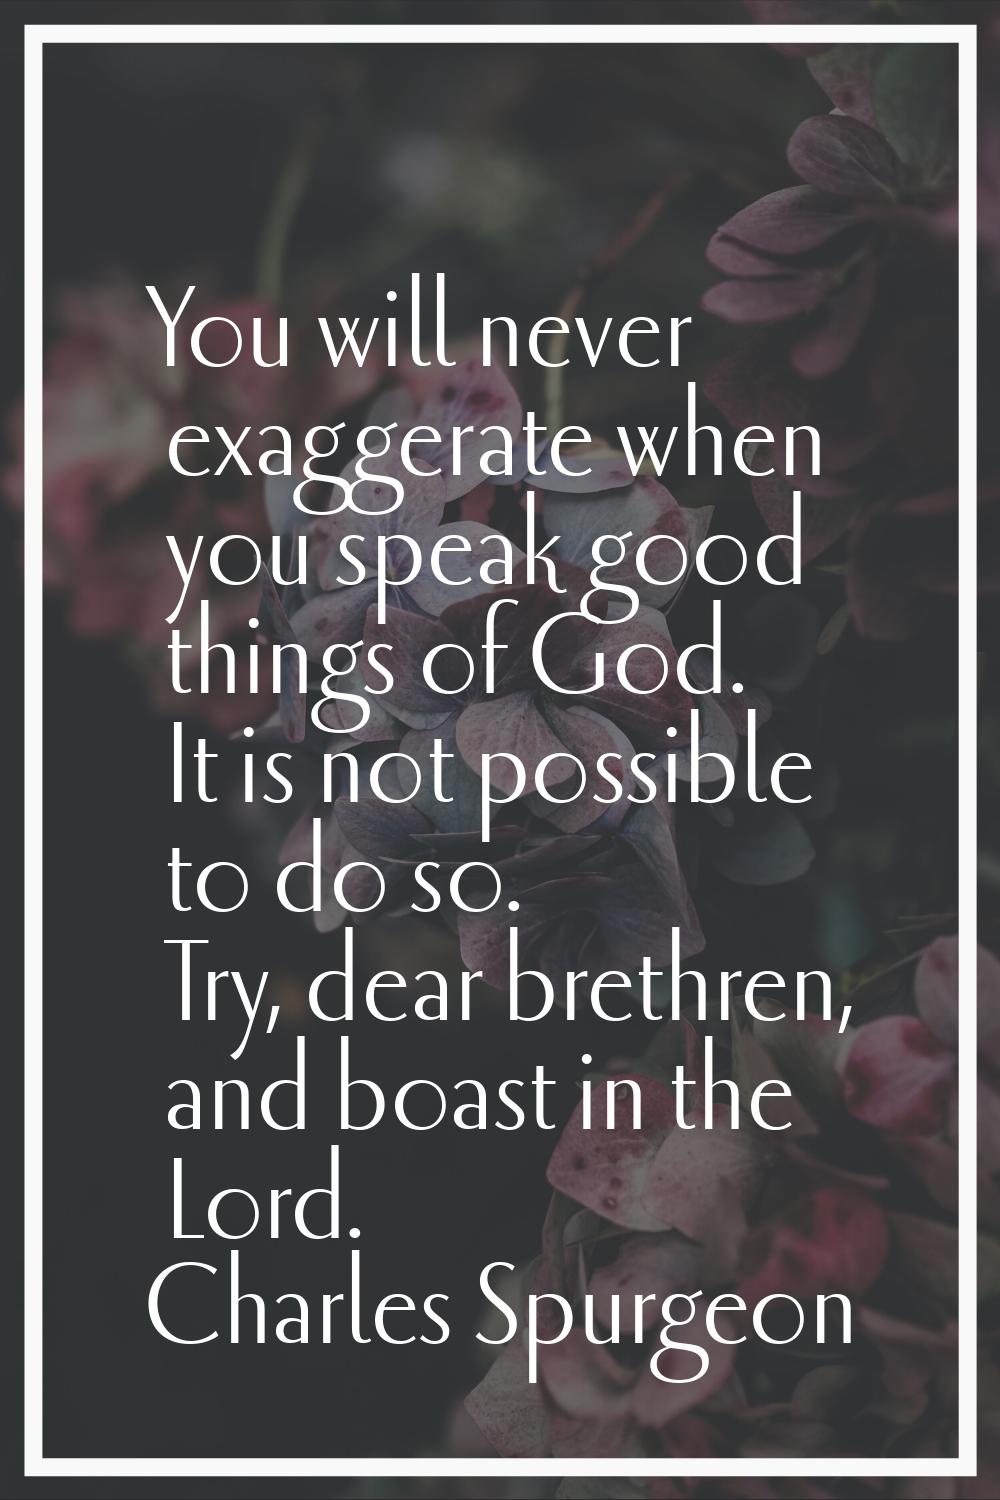 You will never exaggerate when you speak good things of God. It is not possible to do so. Try, dear